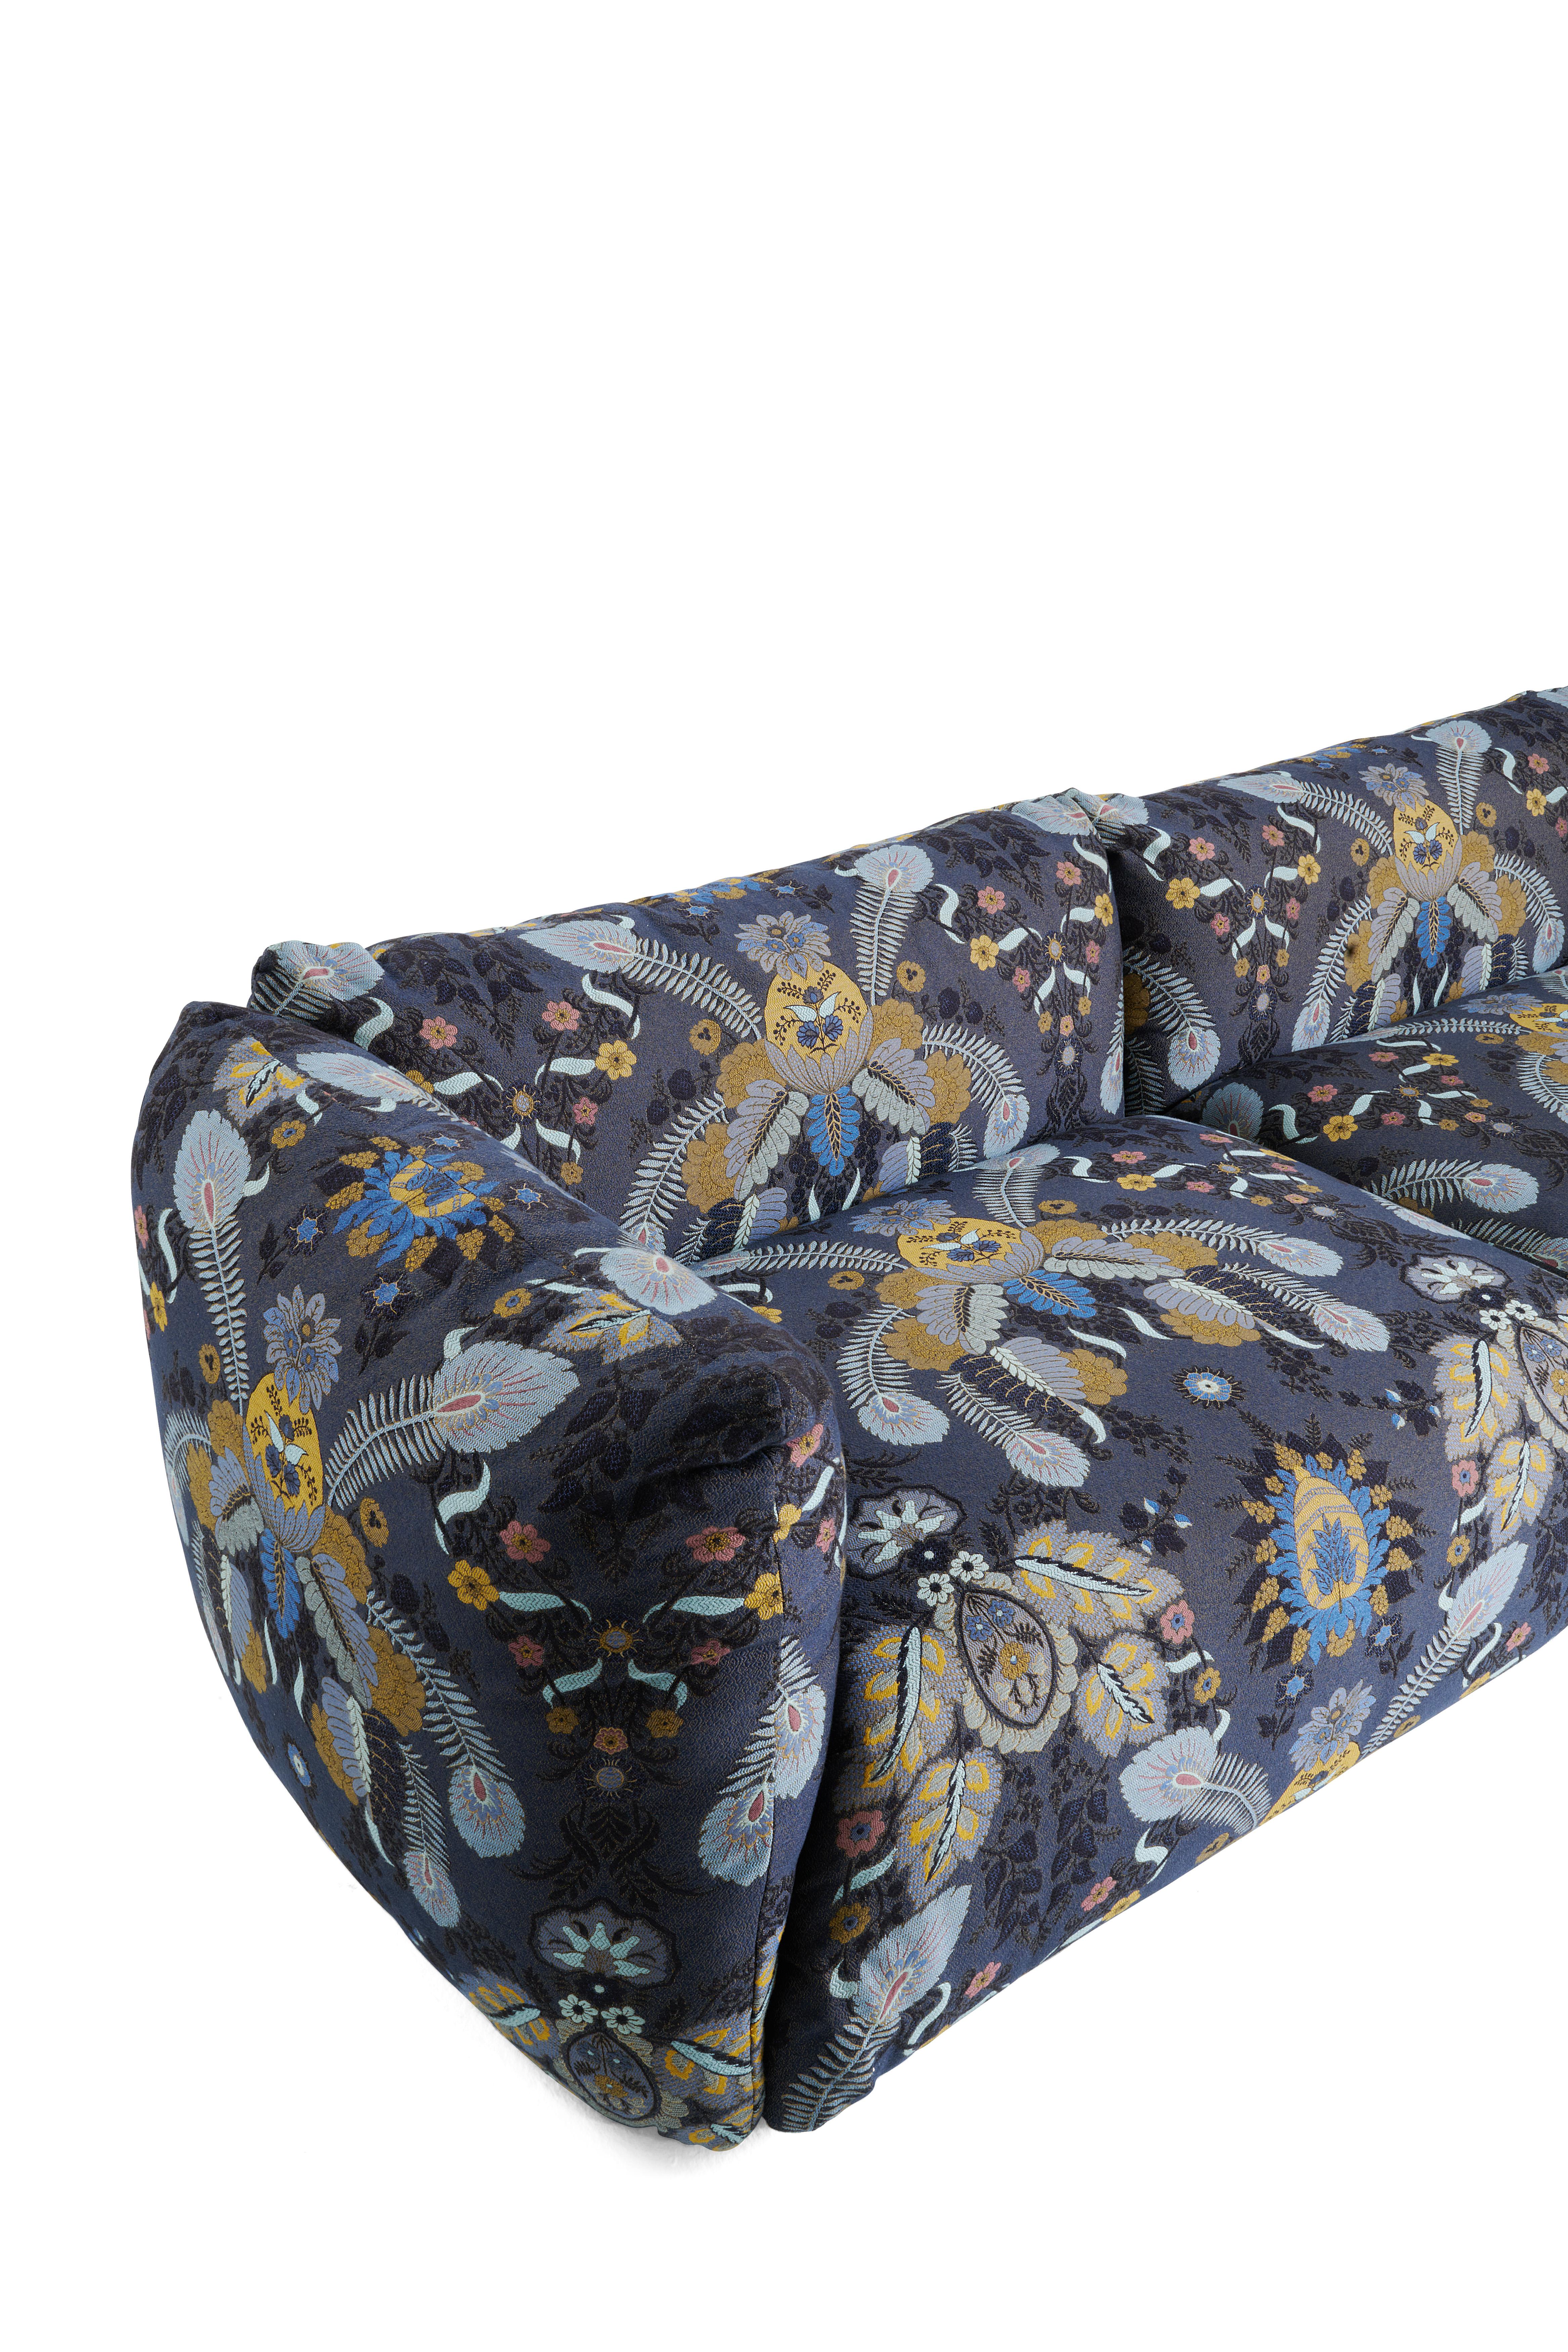 Modern 21st Century Cushy Sofa in Blue Jacquard Fabric by Etro Home Interiors For Sale